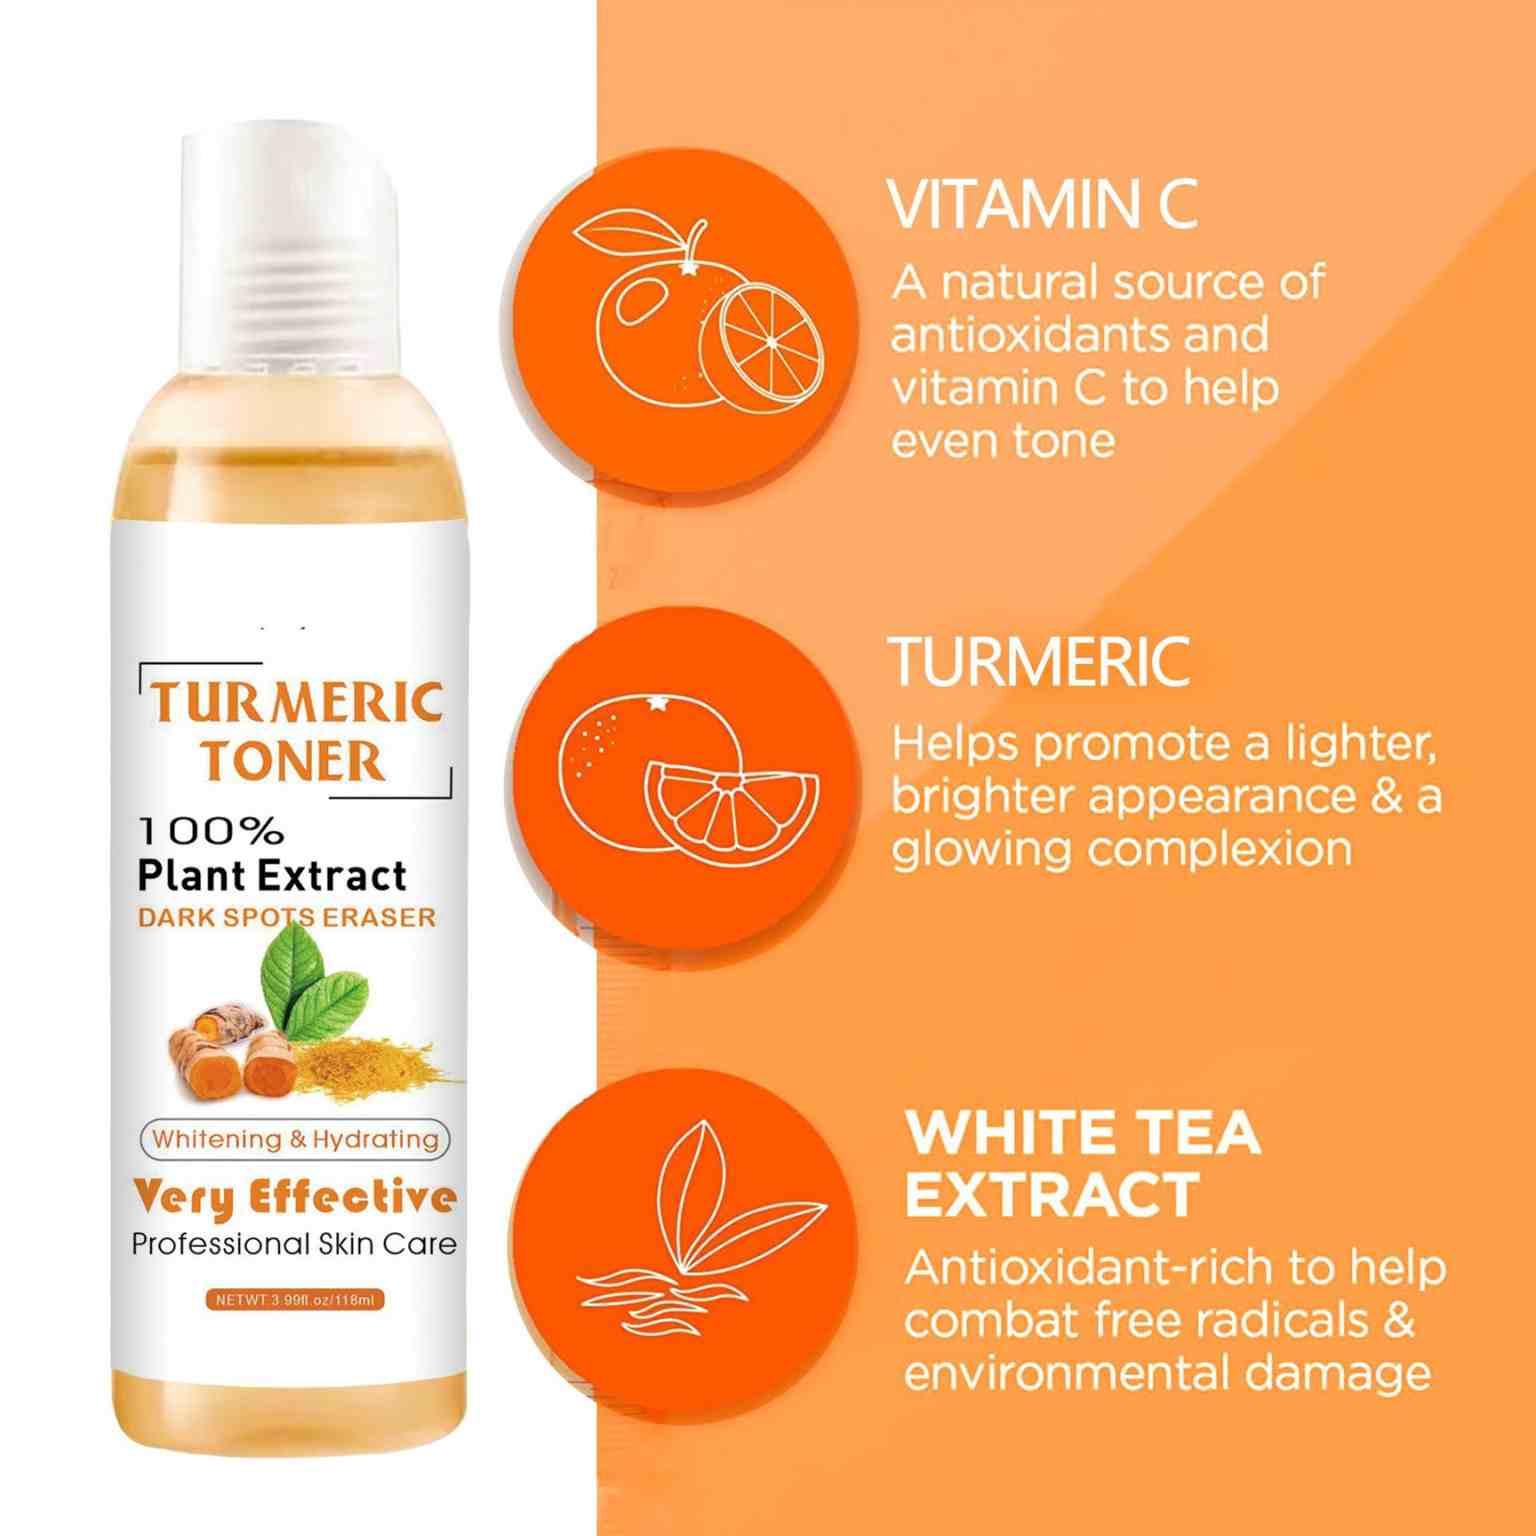 Turmeric Toning Lotion for Skin Whitening, Hydrating and Dark Spots Eraser - A.A.Y FASHION